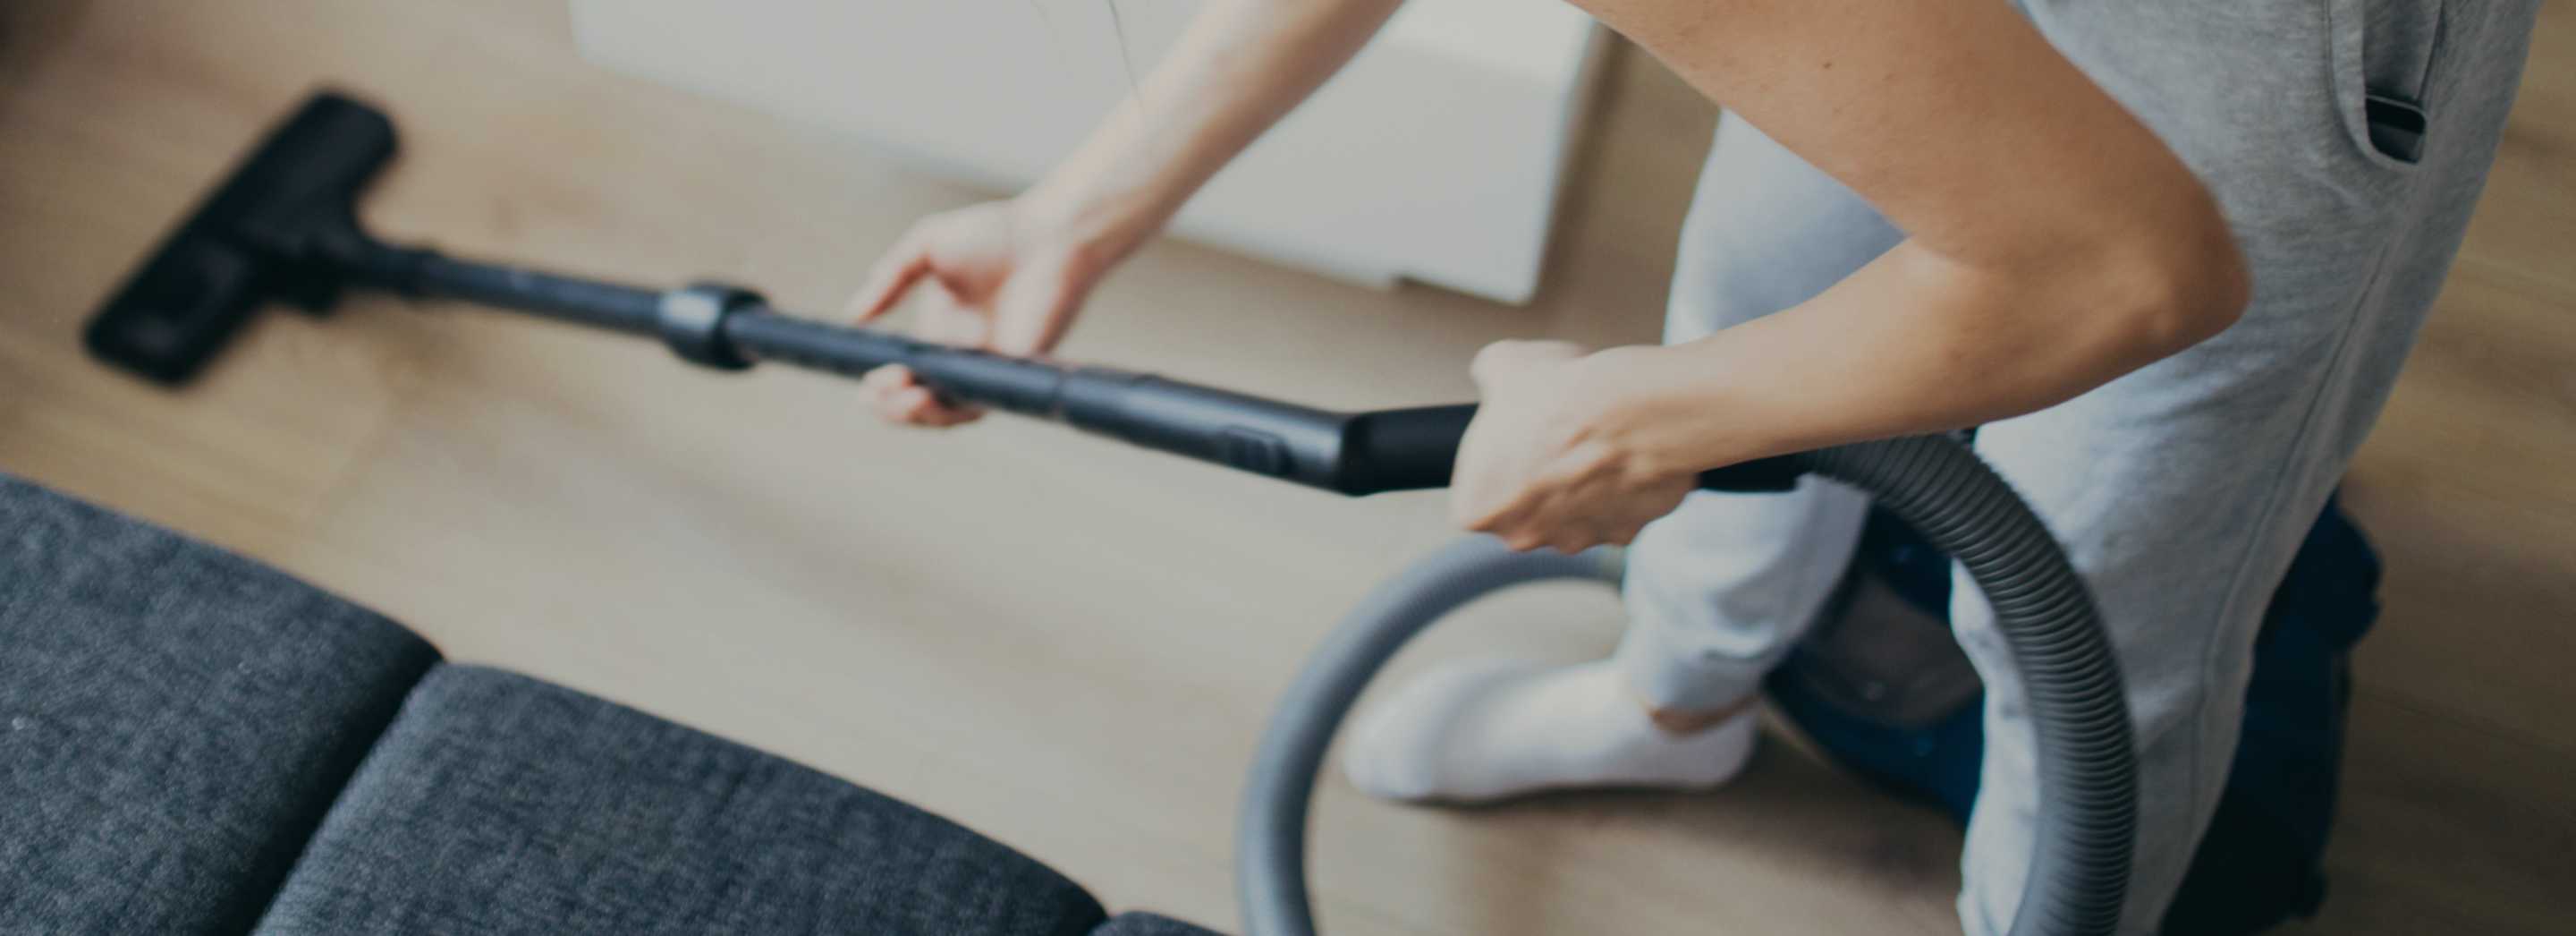 Someone with a long arm vacuum and head is shown vacuuming their wooden floors in a pair of grey pants